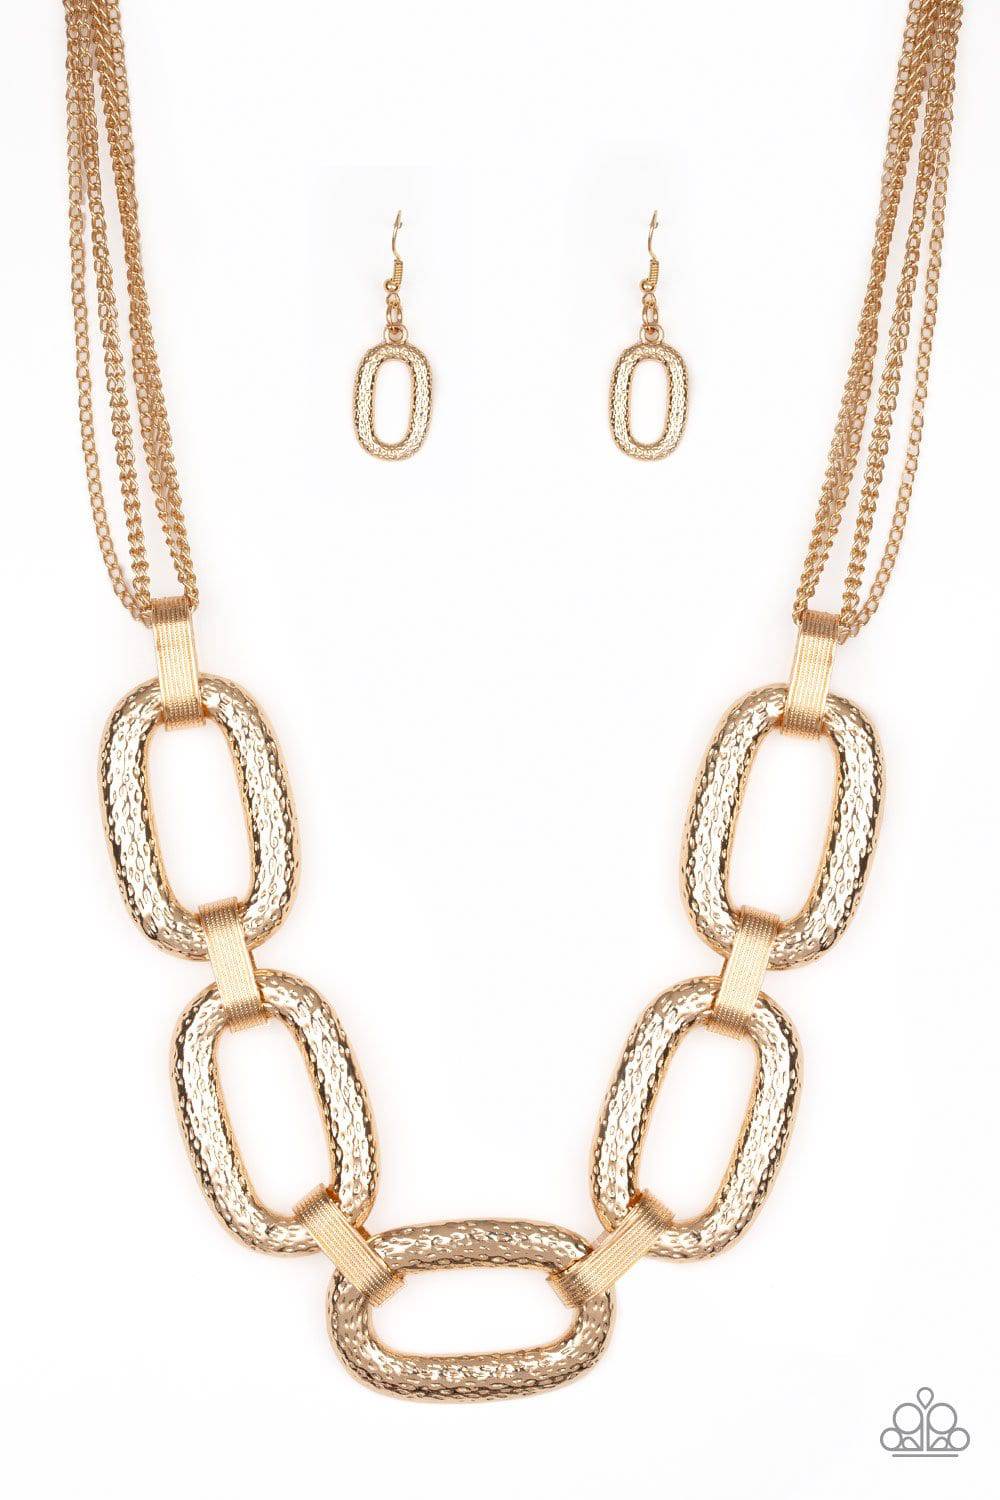 Take Charge - Gold Necklace - Paparazzi Accessories - GlaMarous Titi Jewels